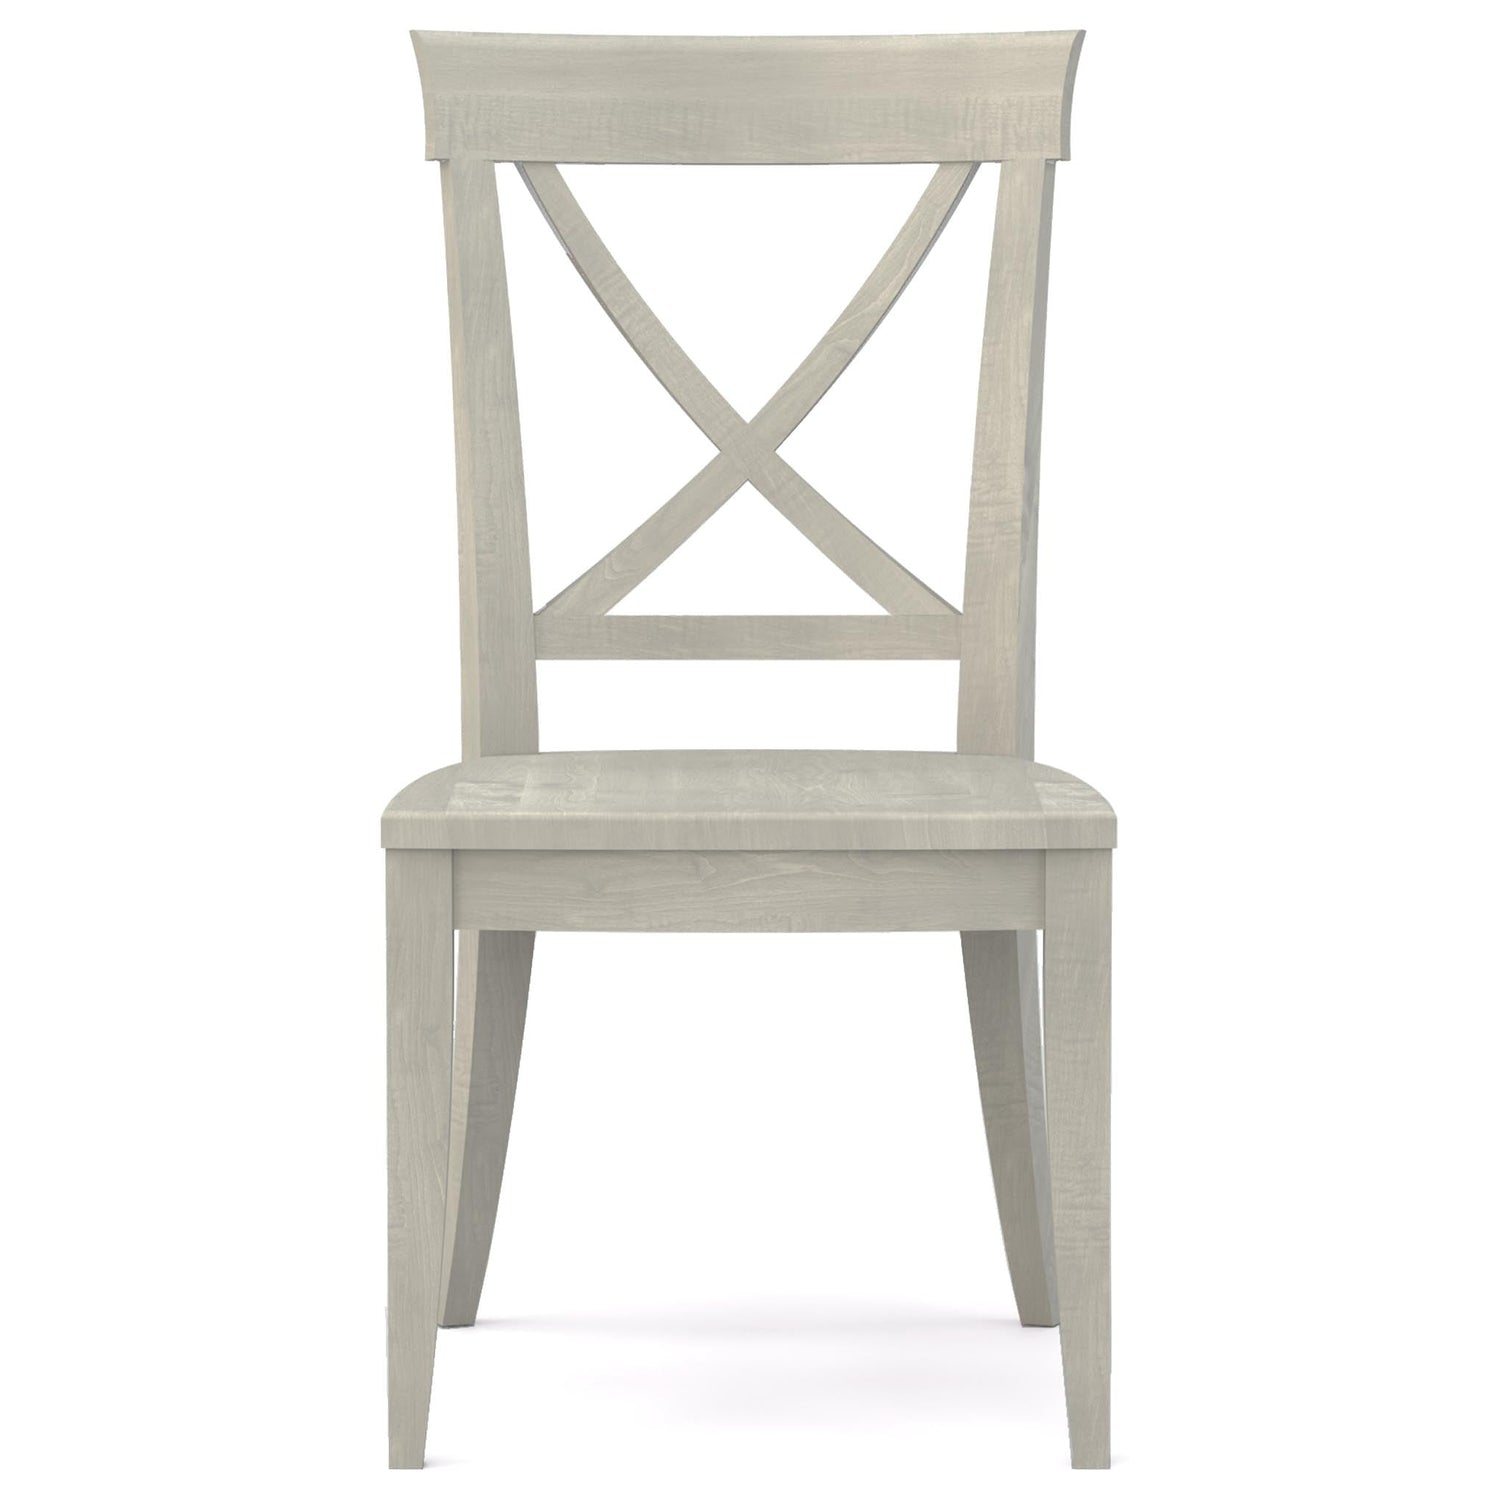 Revere Wooden Side Chair